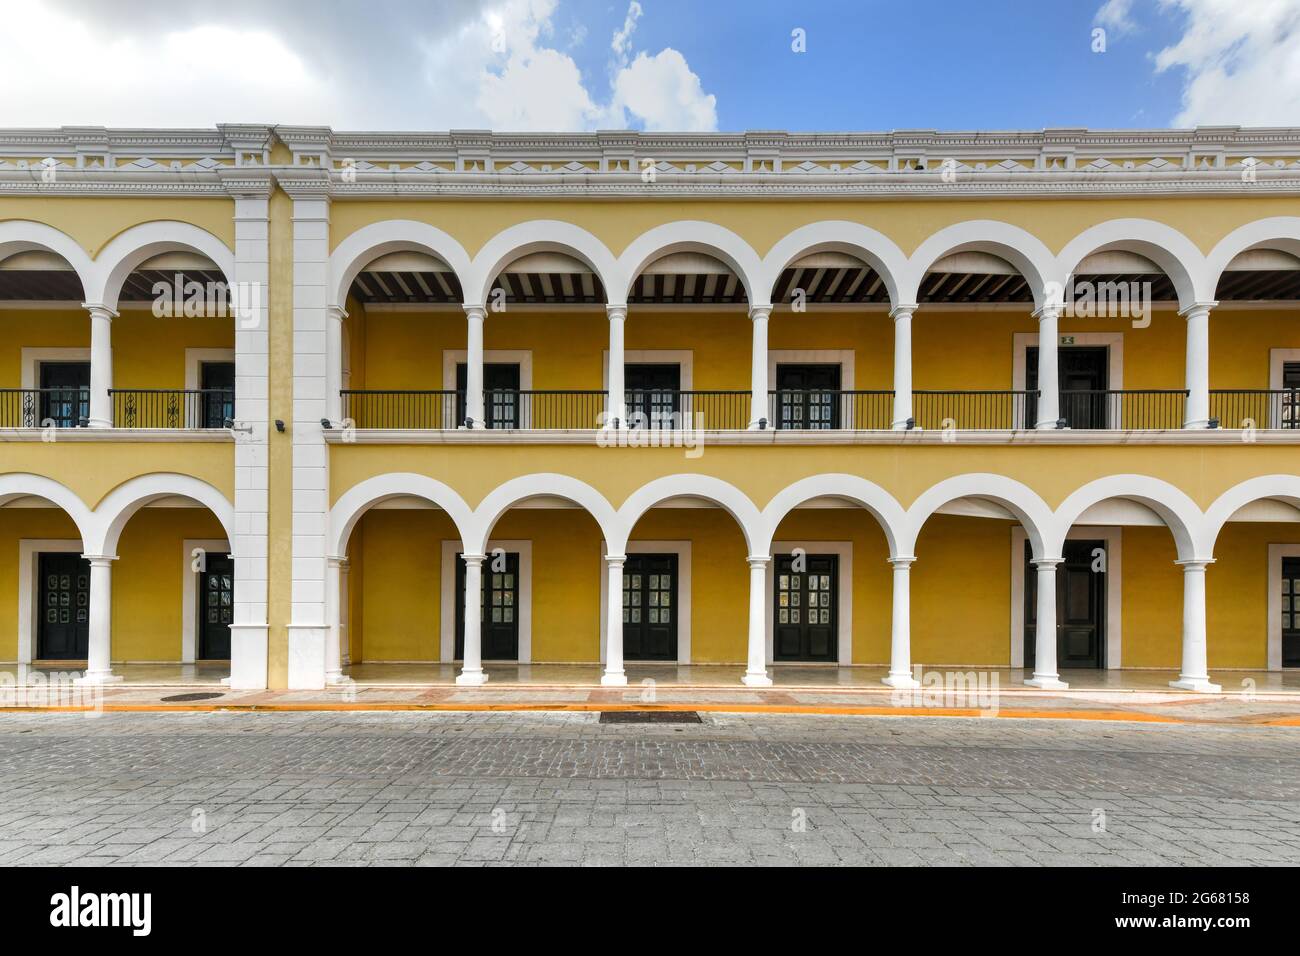 The Palace Museum in Campeche, Mexico. It is a large museum at the plaza that has exhibits about the city's logwood industry and salt trading. Stock Photo